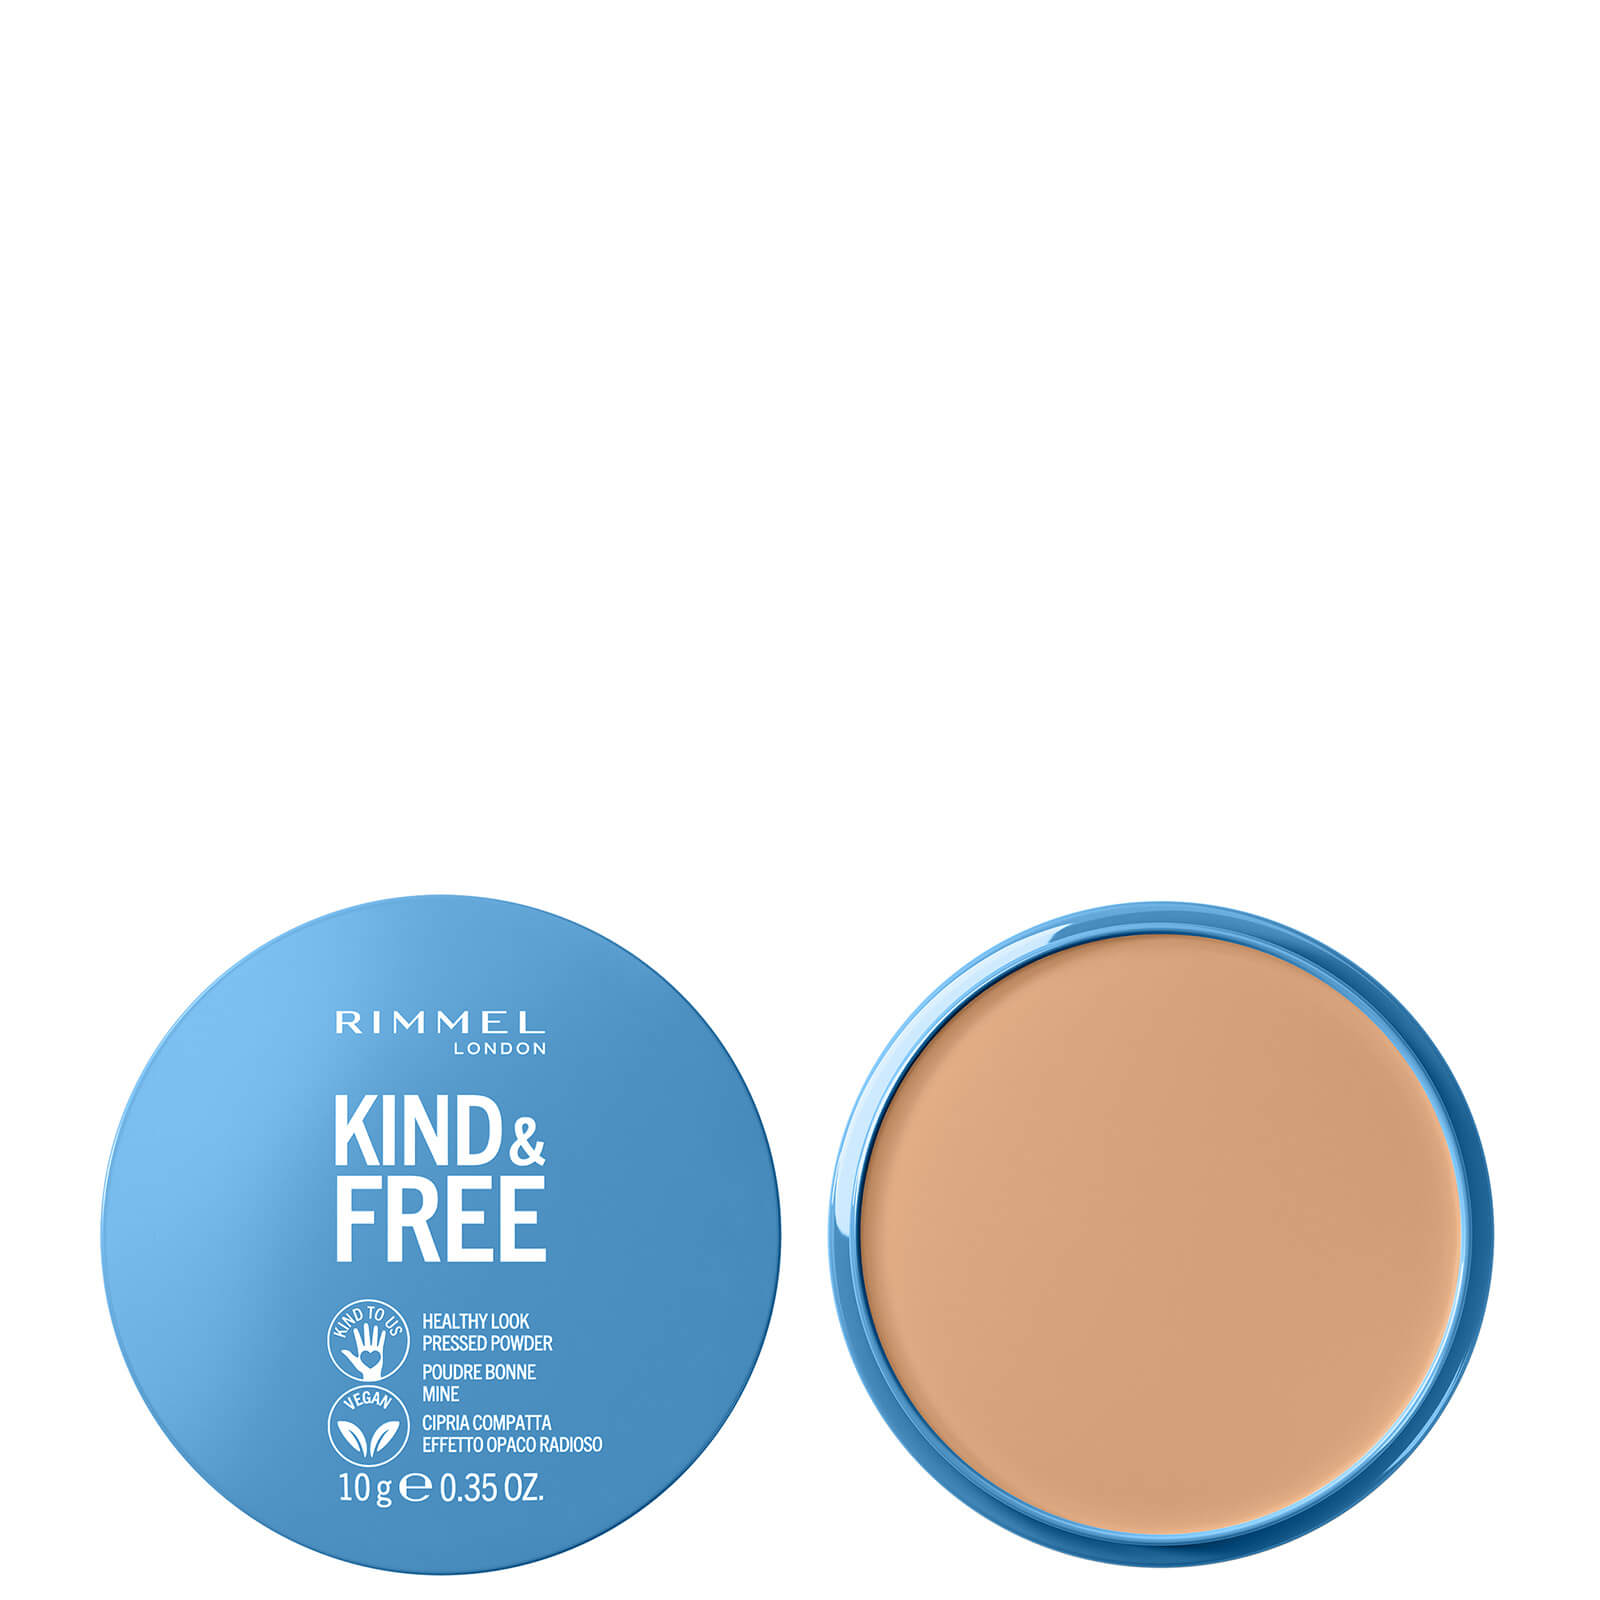 Photos - Other Cosmetics Rimmel Kind and Free Pressed Powder 10g  - Light 993501222 (Various Shades)